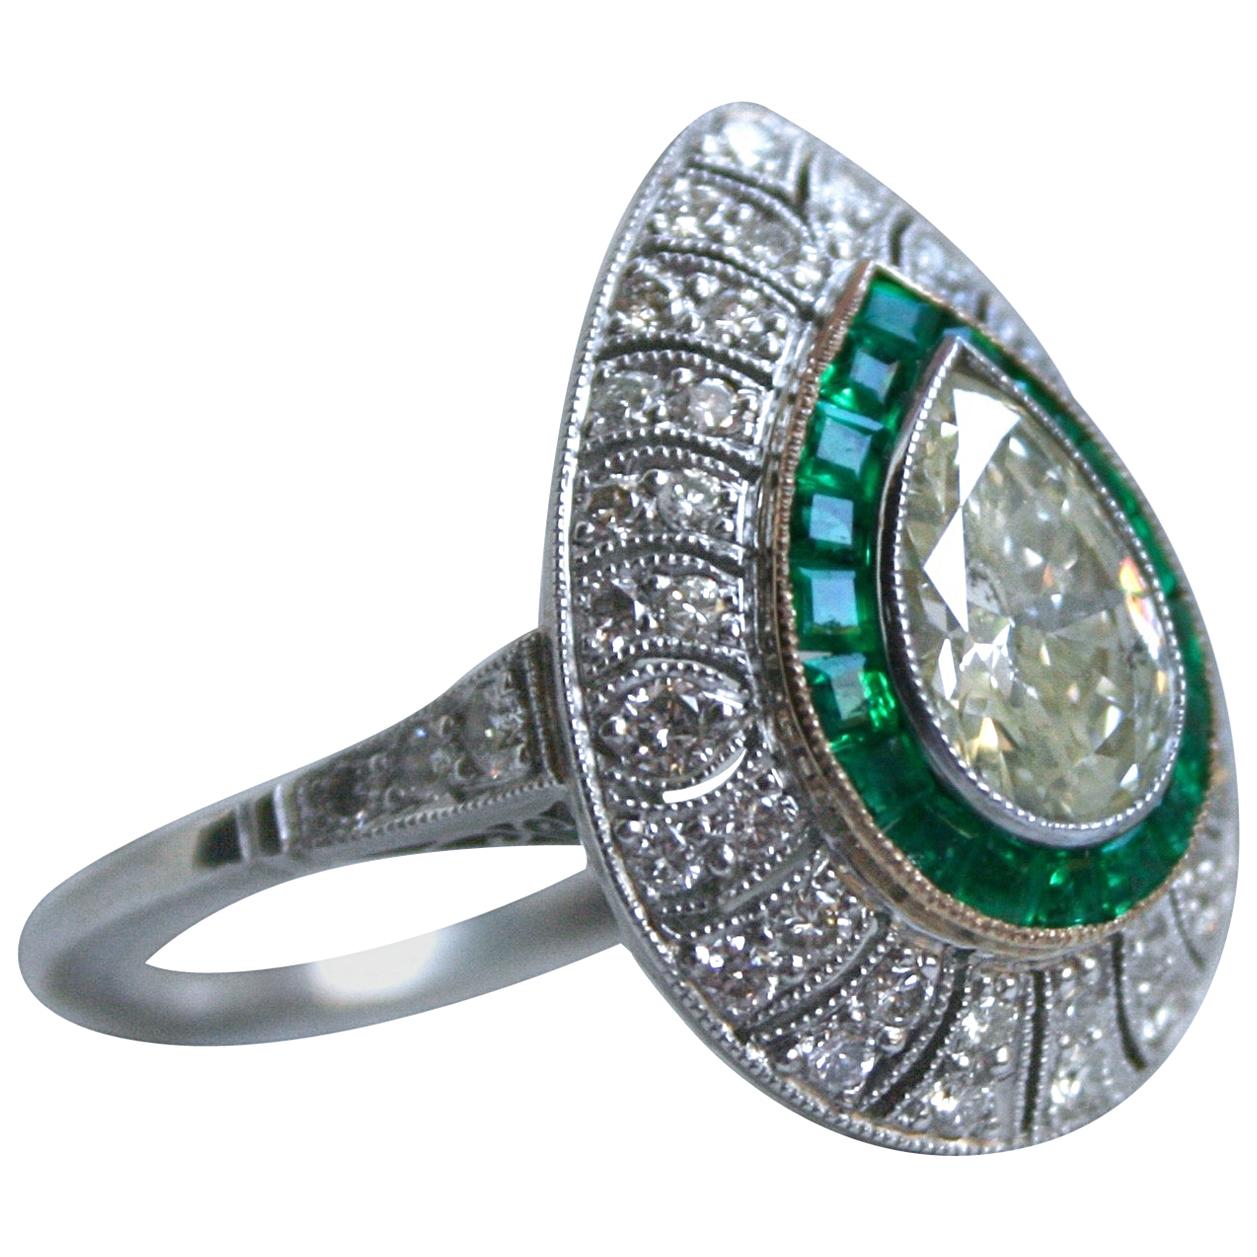 Pear Cut Diamond and Emerald Halo Ring Engagement Ring in Platinum, 2.45 Carat